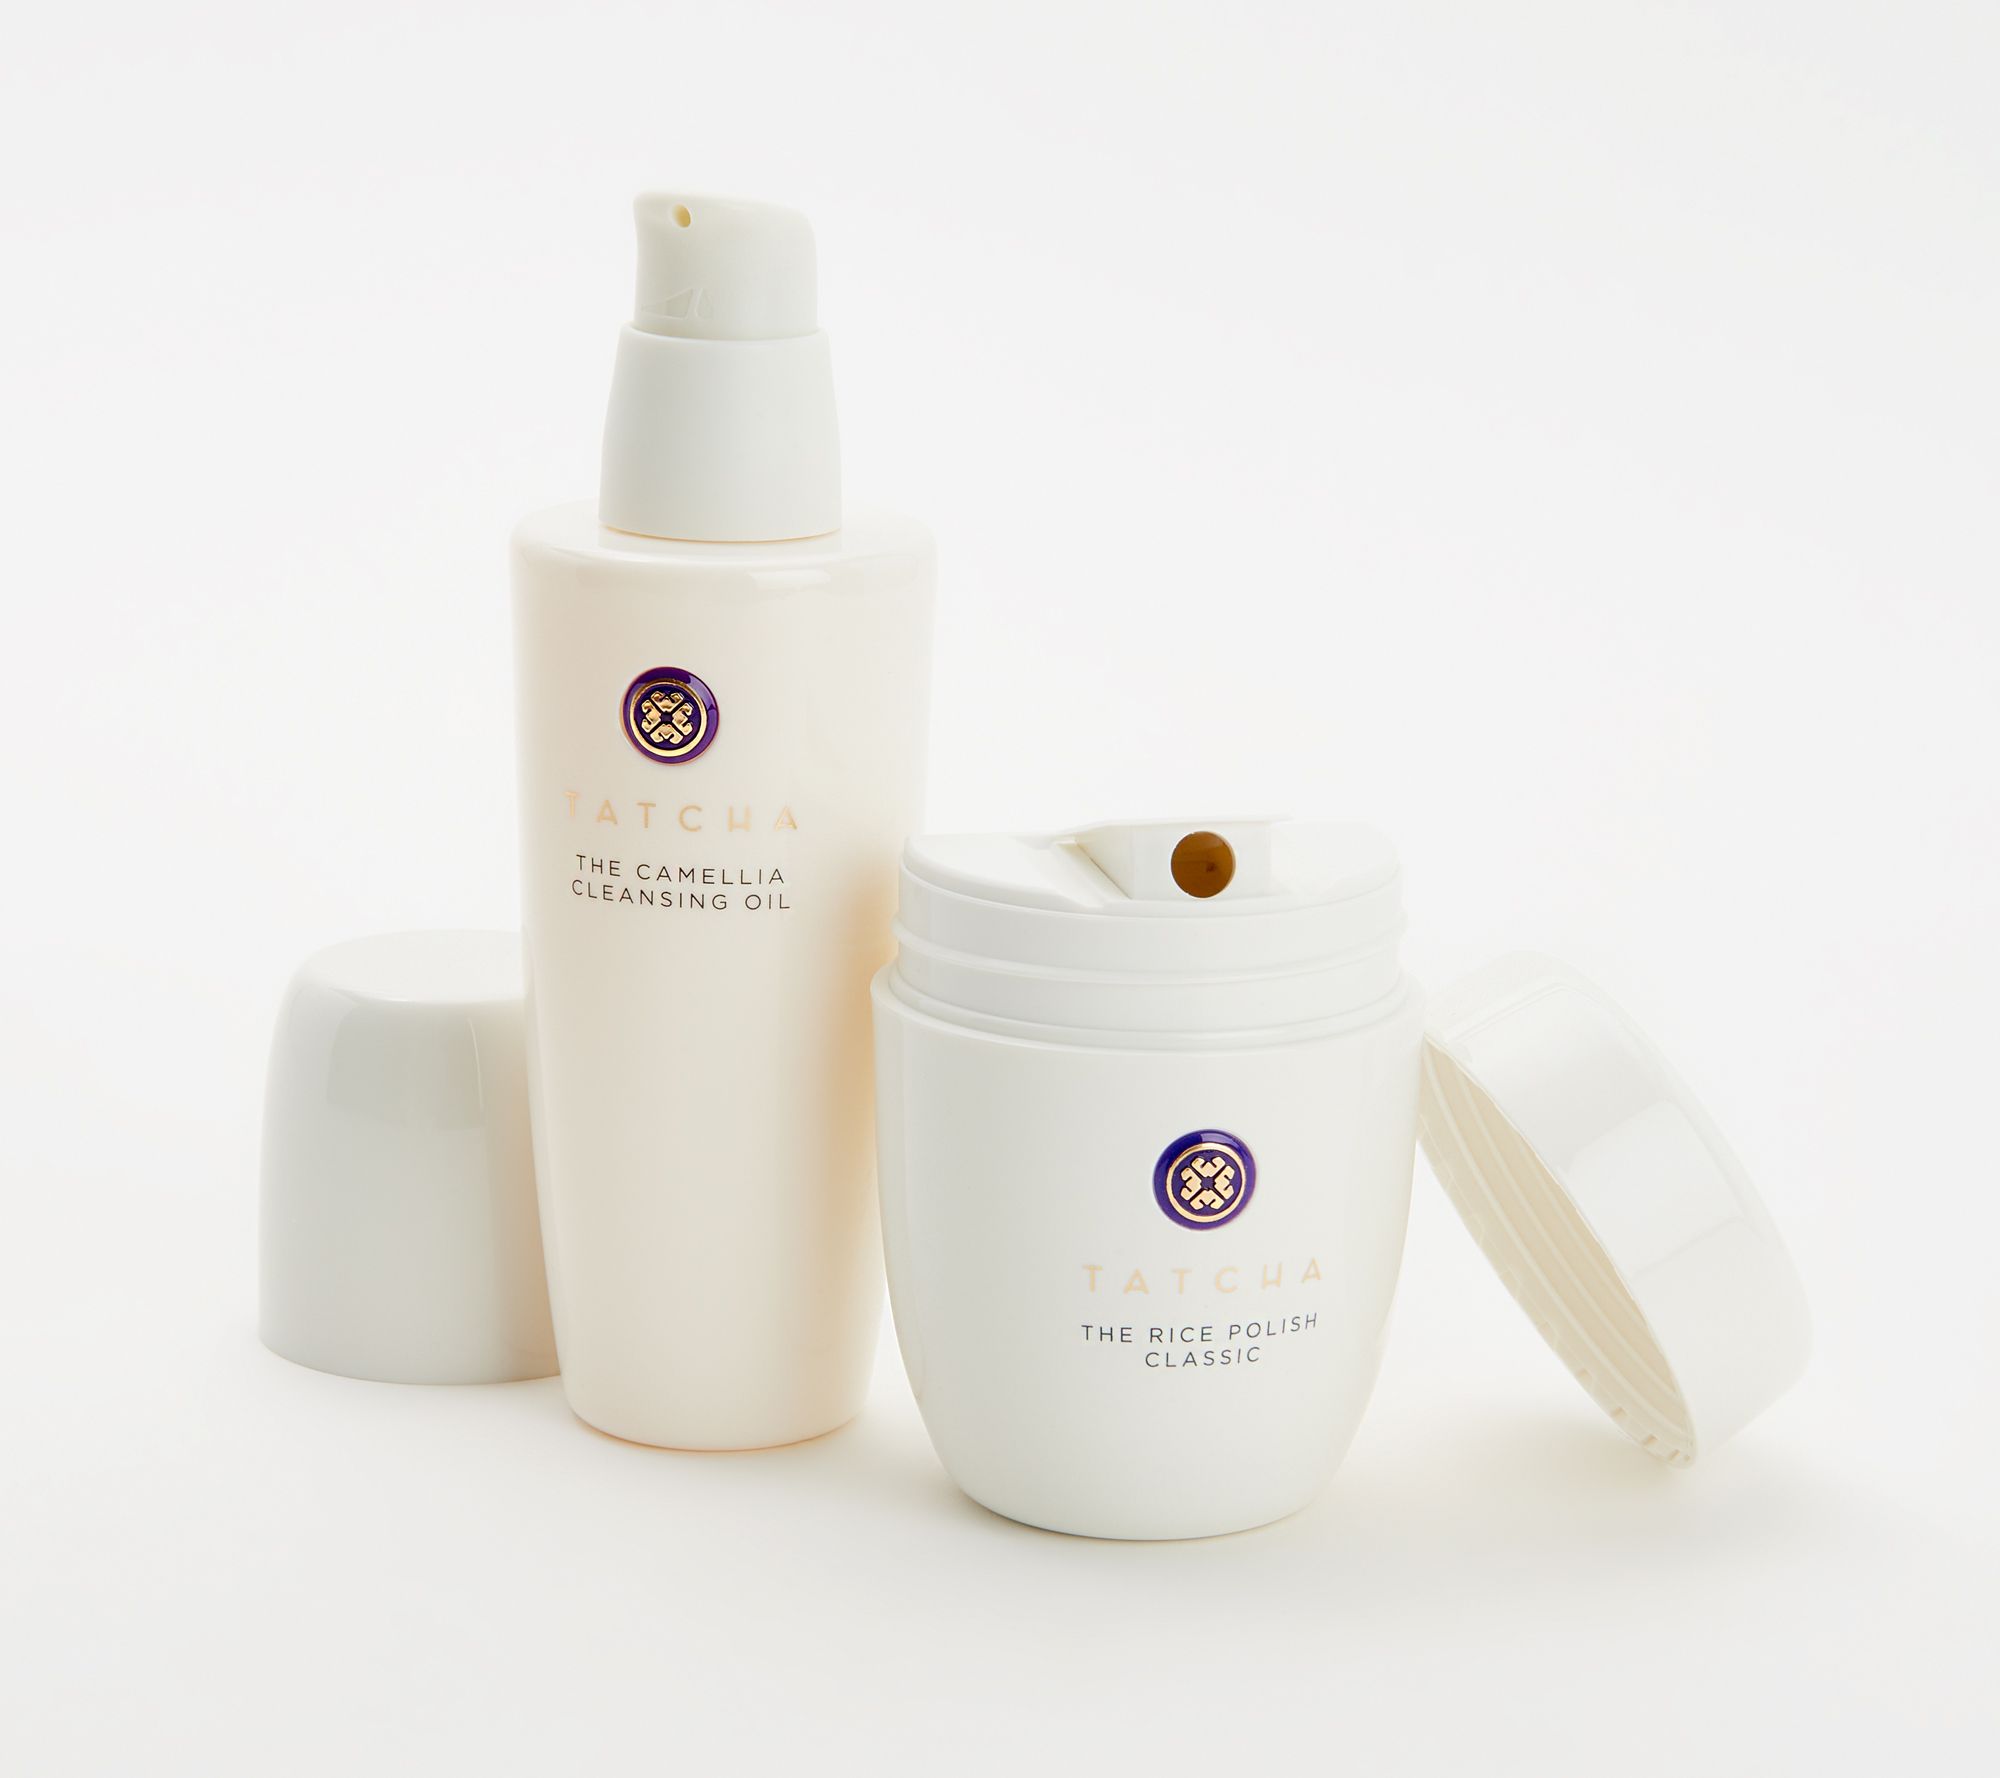 TATCHA Camellia Cleansing Oil and Rice Powder 2-Piece Kit - QVC.com